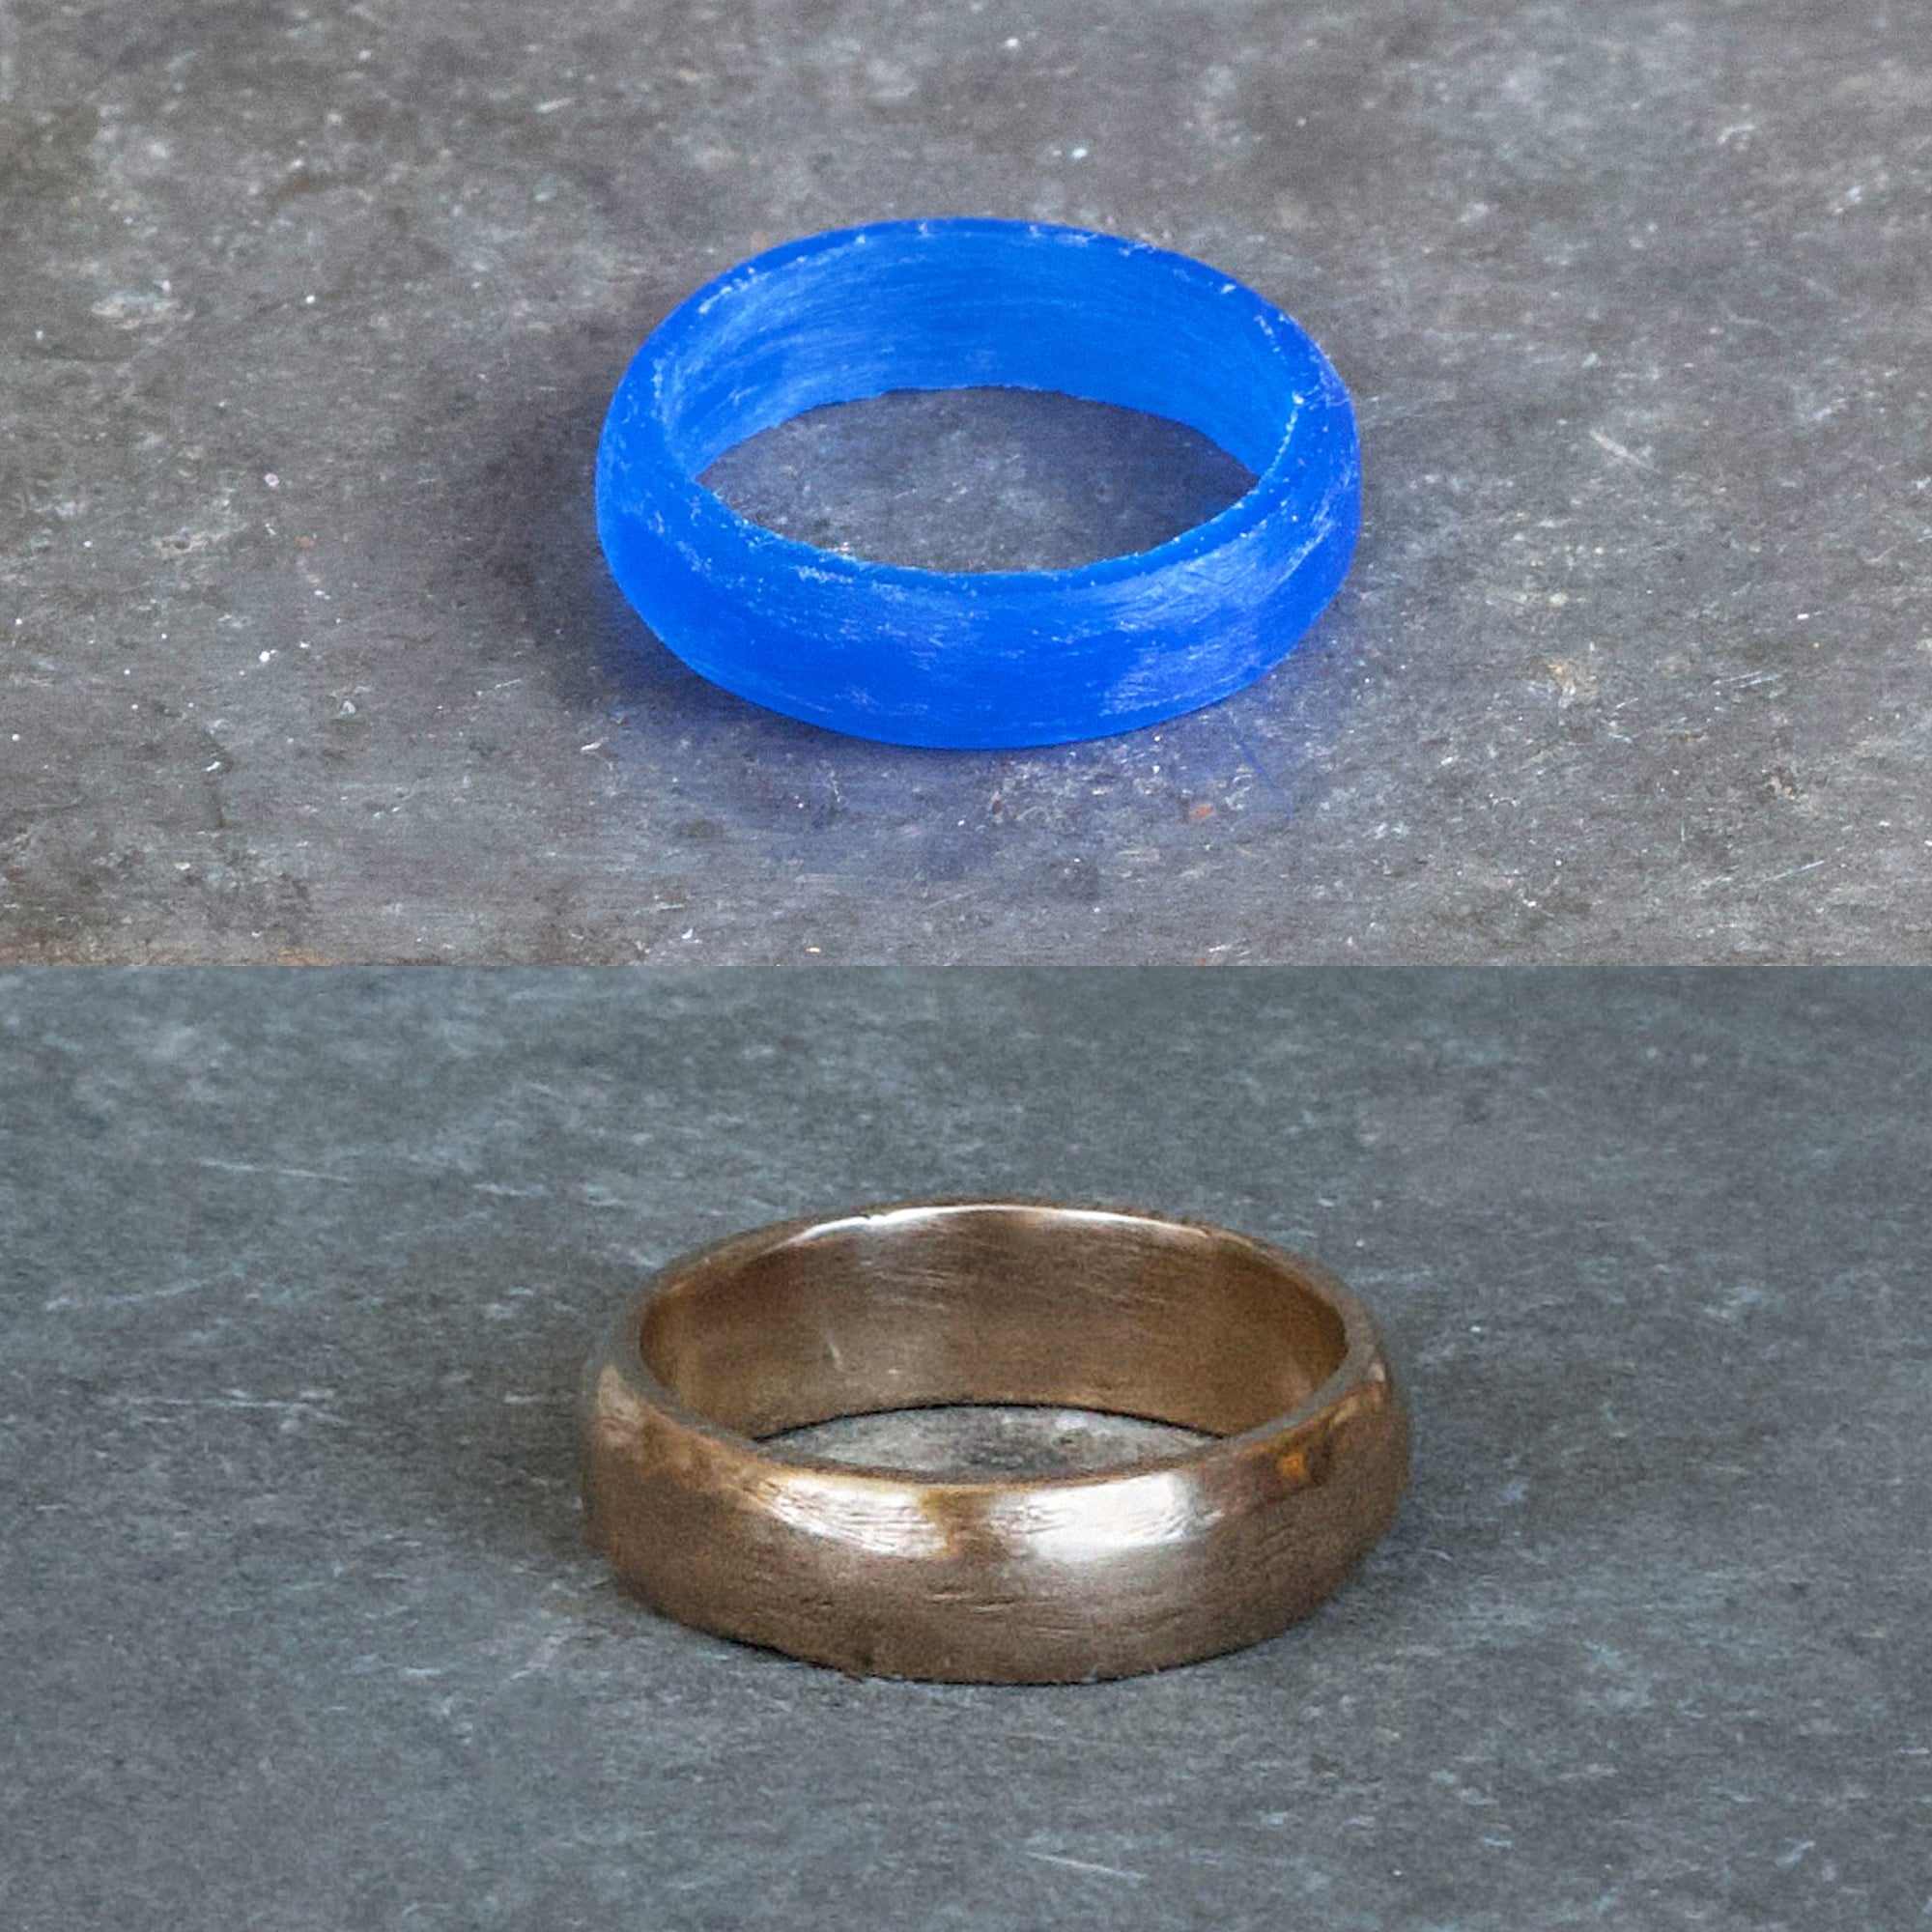 Basic Ring Wax Carving Class